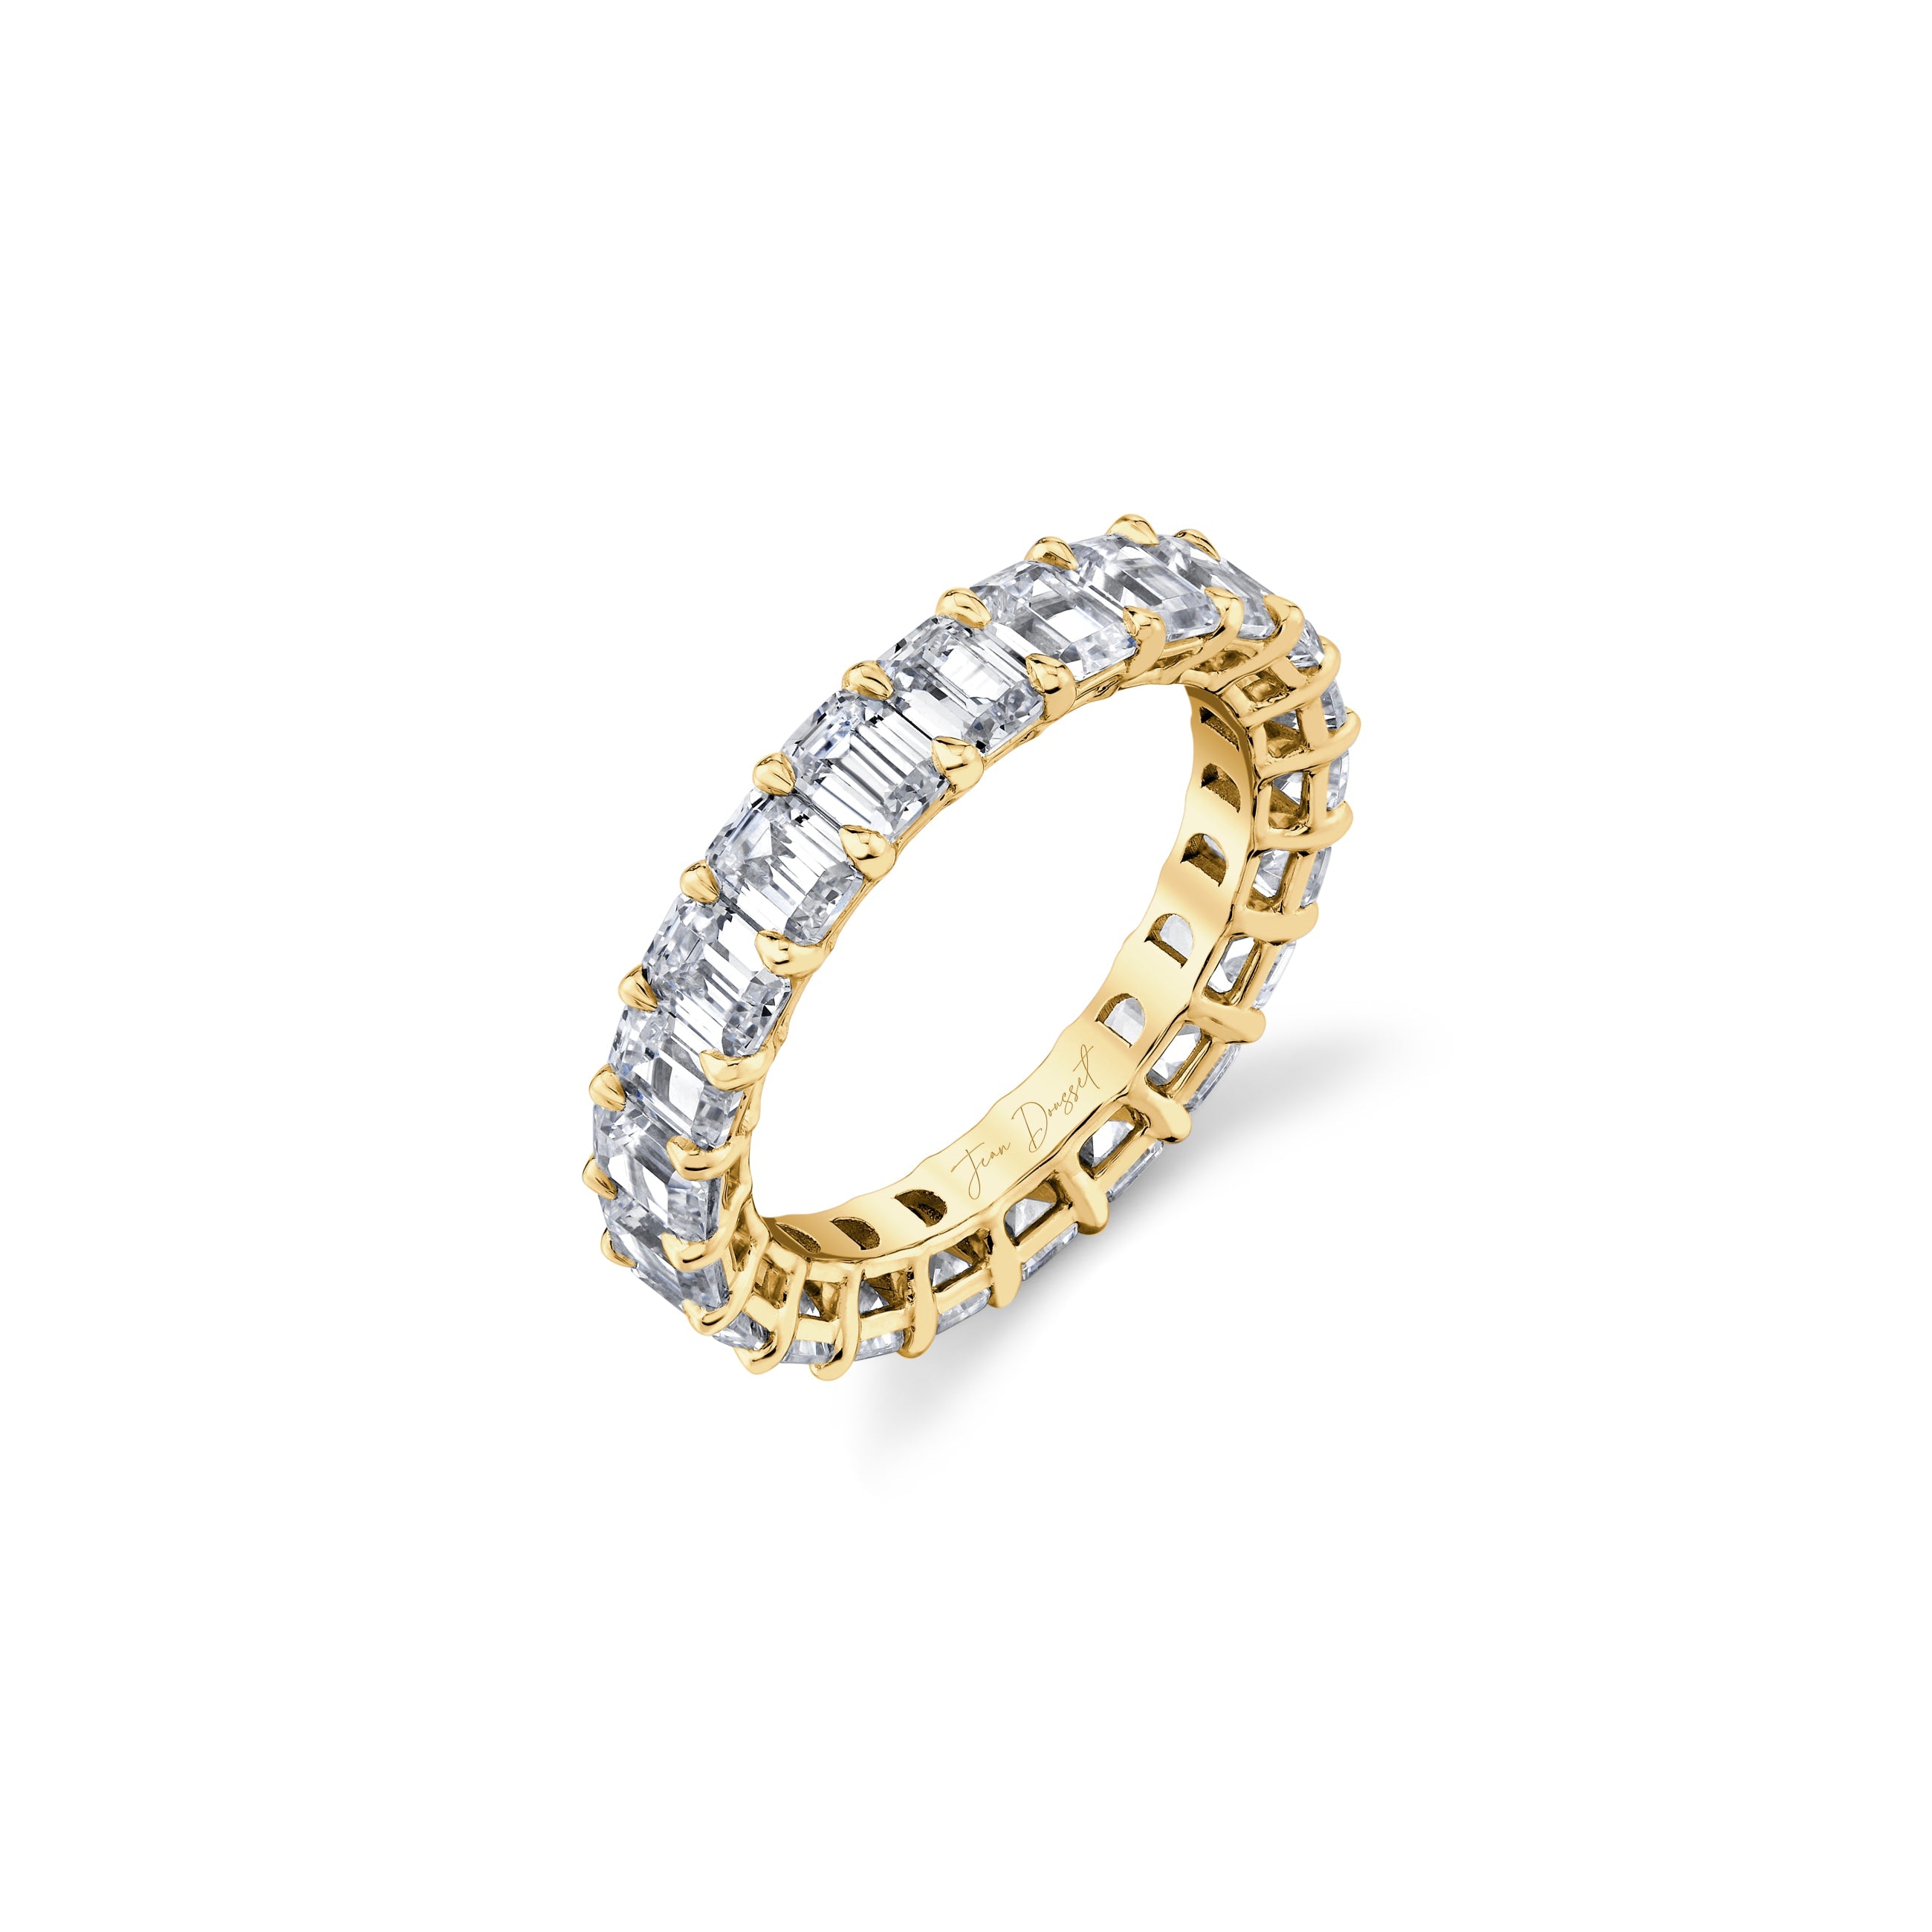 Ring stopper Band band Yellow gold 18 kt width 0.25